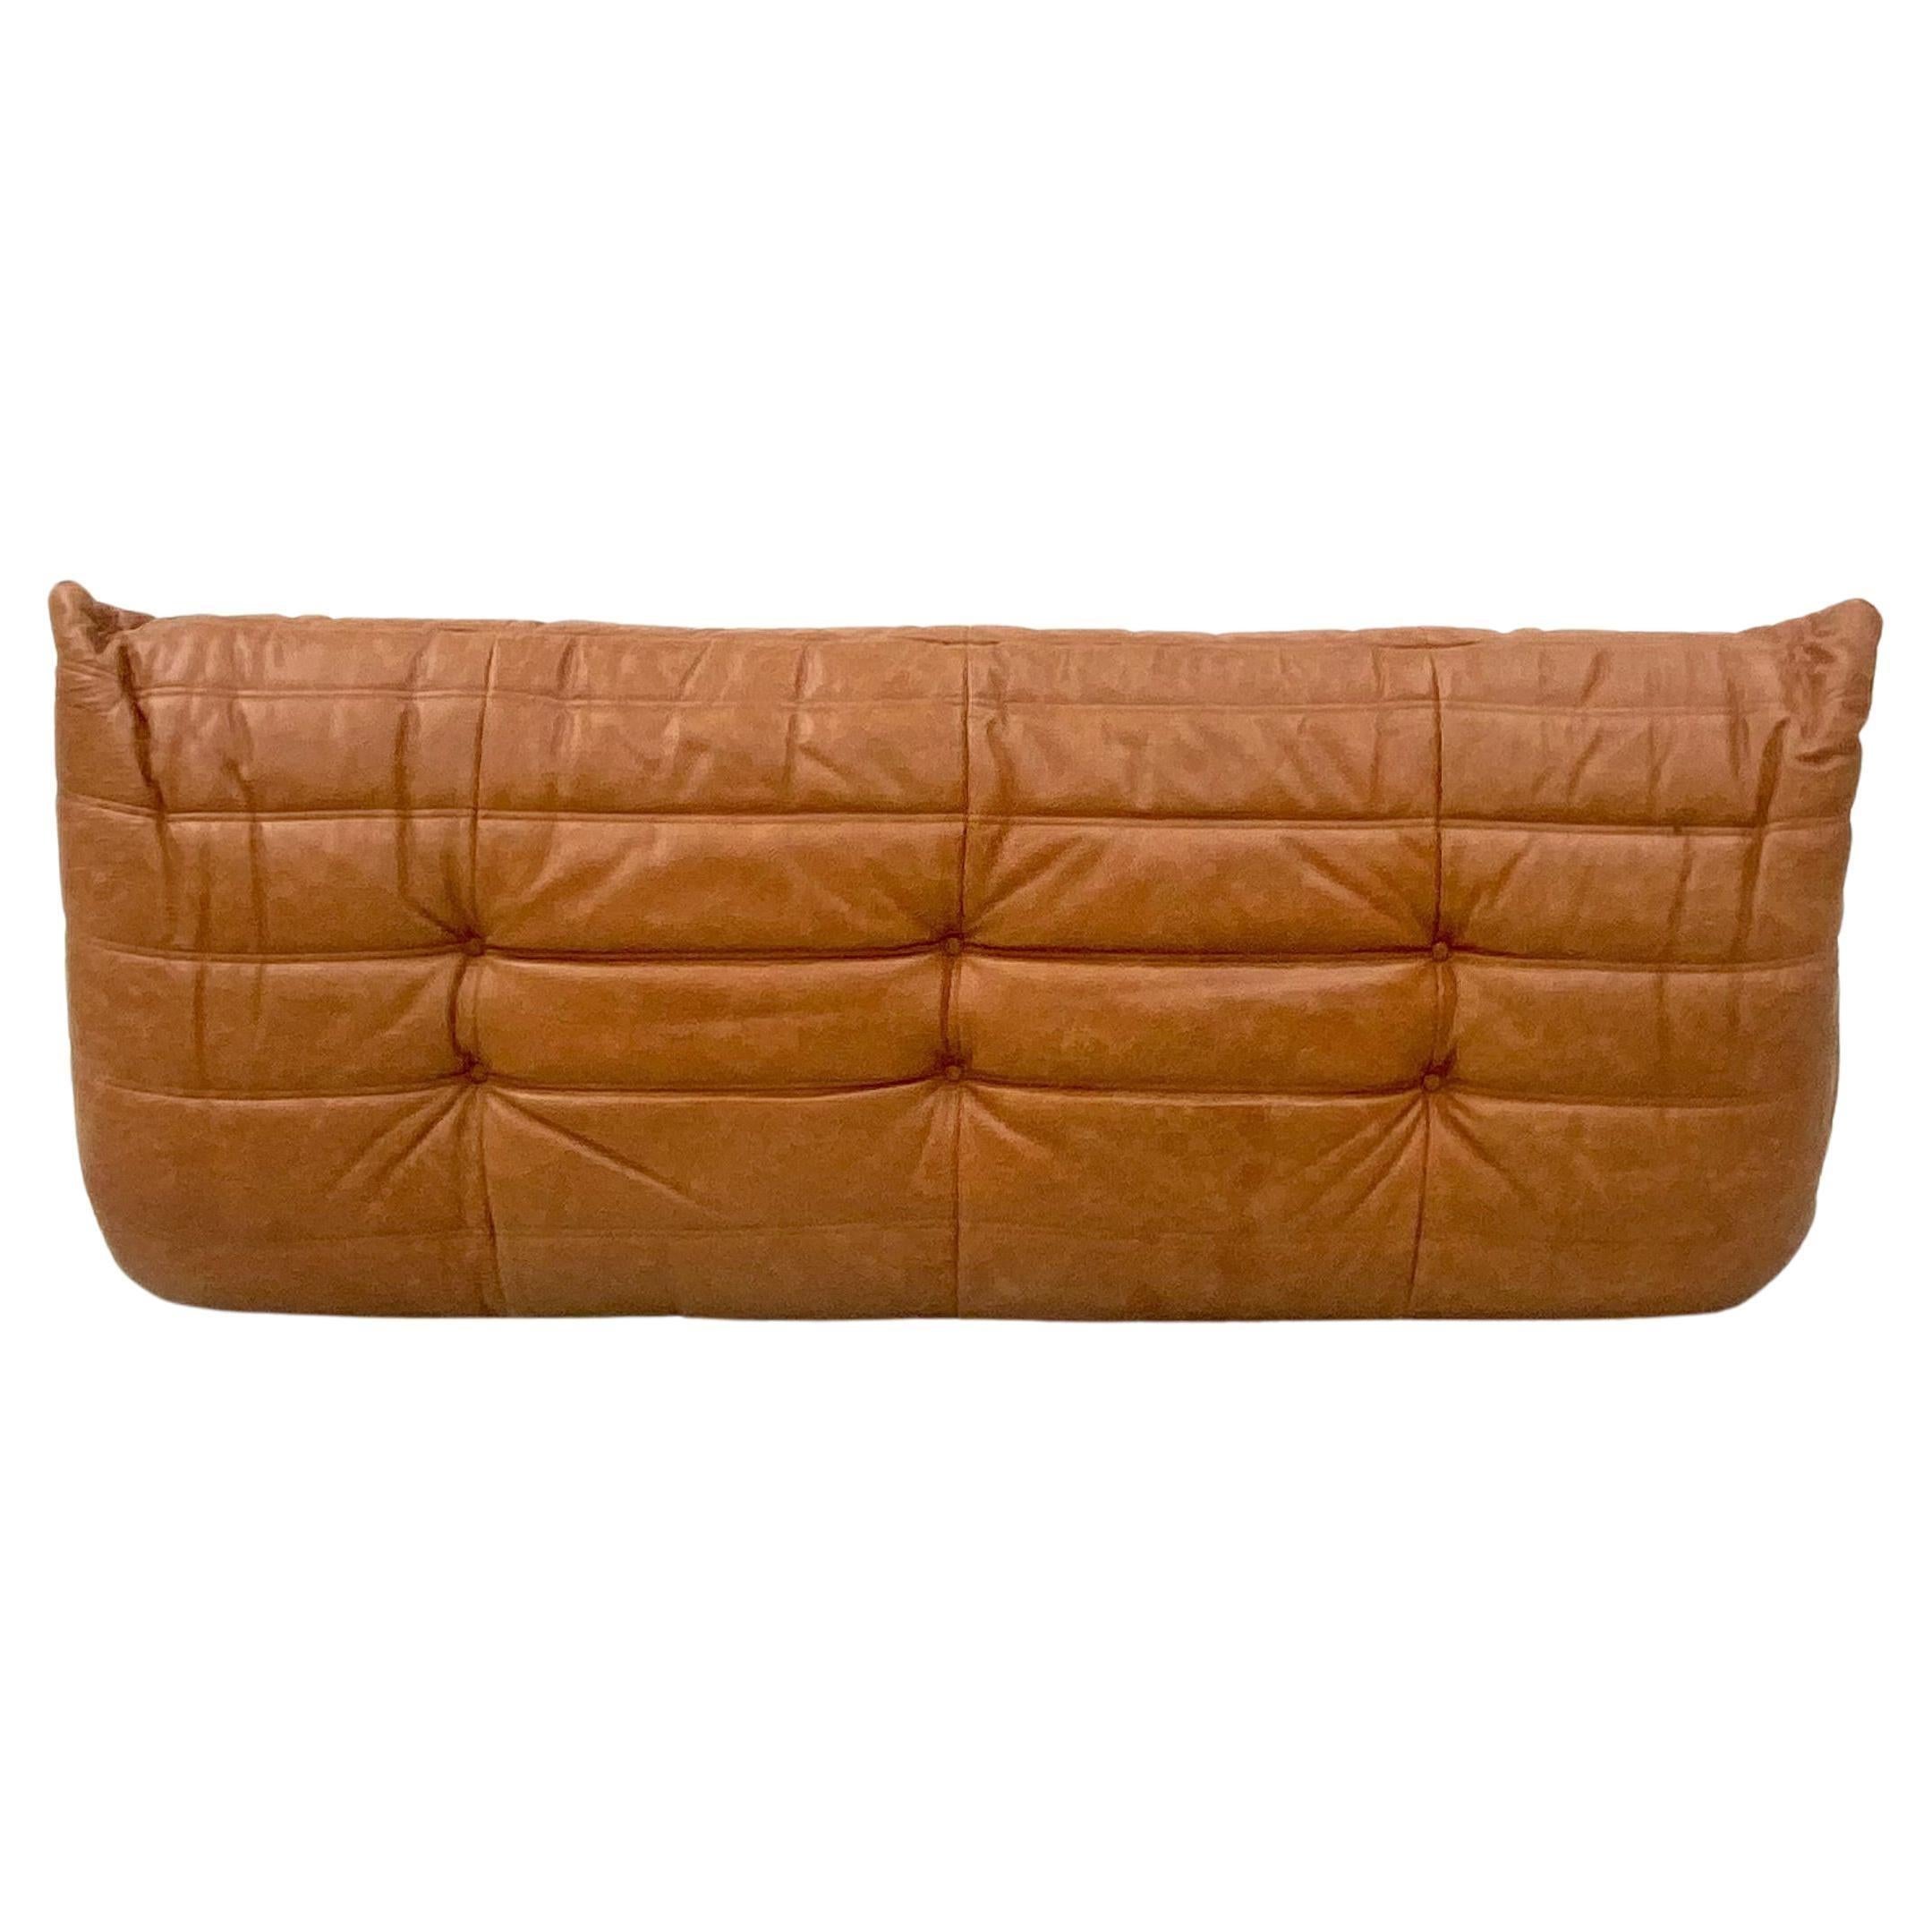 20th Century French Vintage Togo Sofa in Cognac Leather by Michel Ducaroy for Ligne Roset